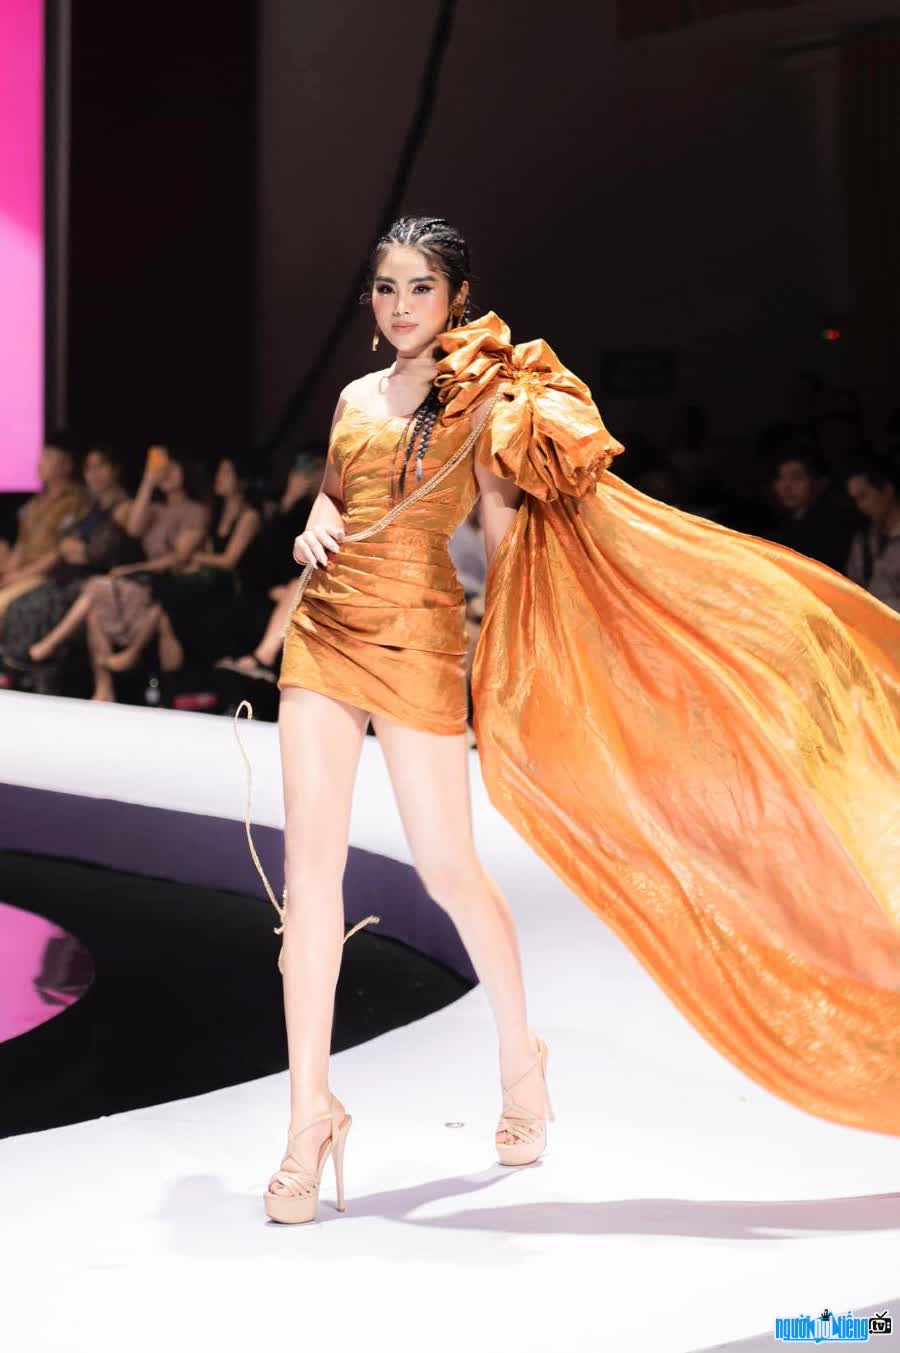 Image of runner-up Chu Thi Anh confidently striding on the fashion catwalk